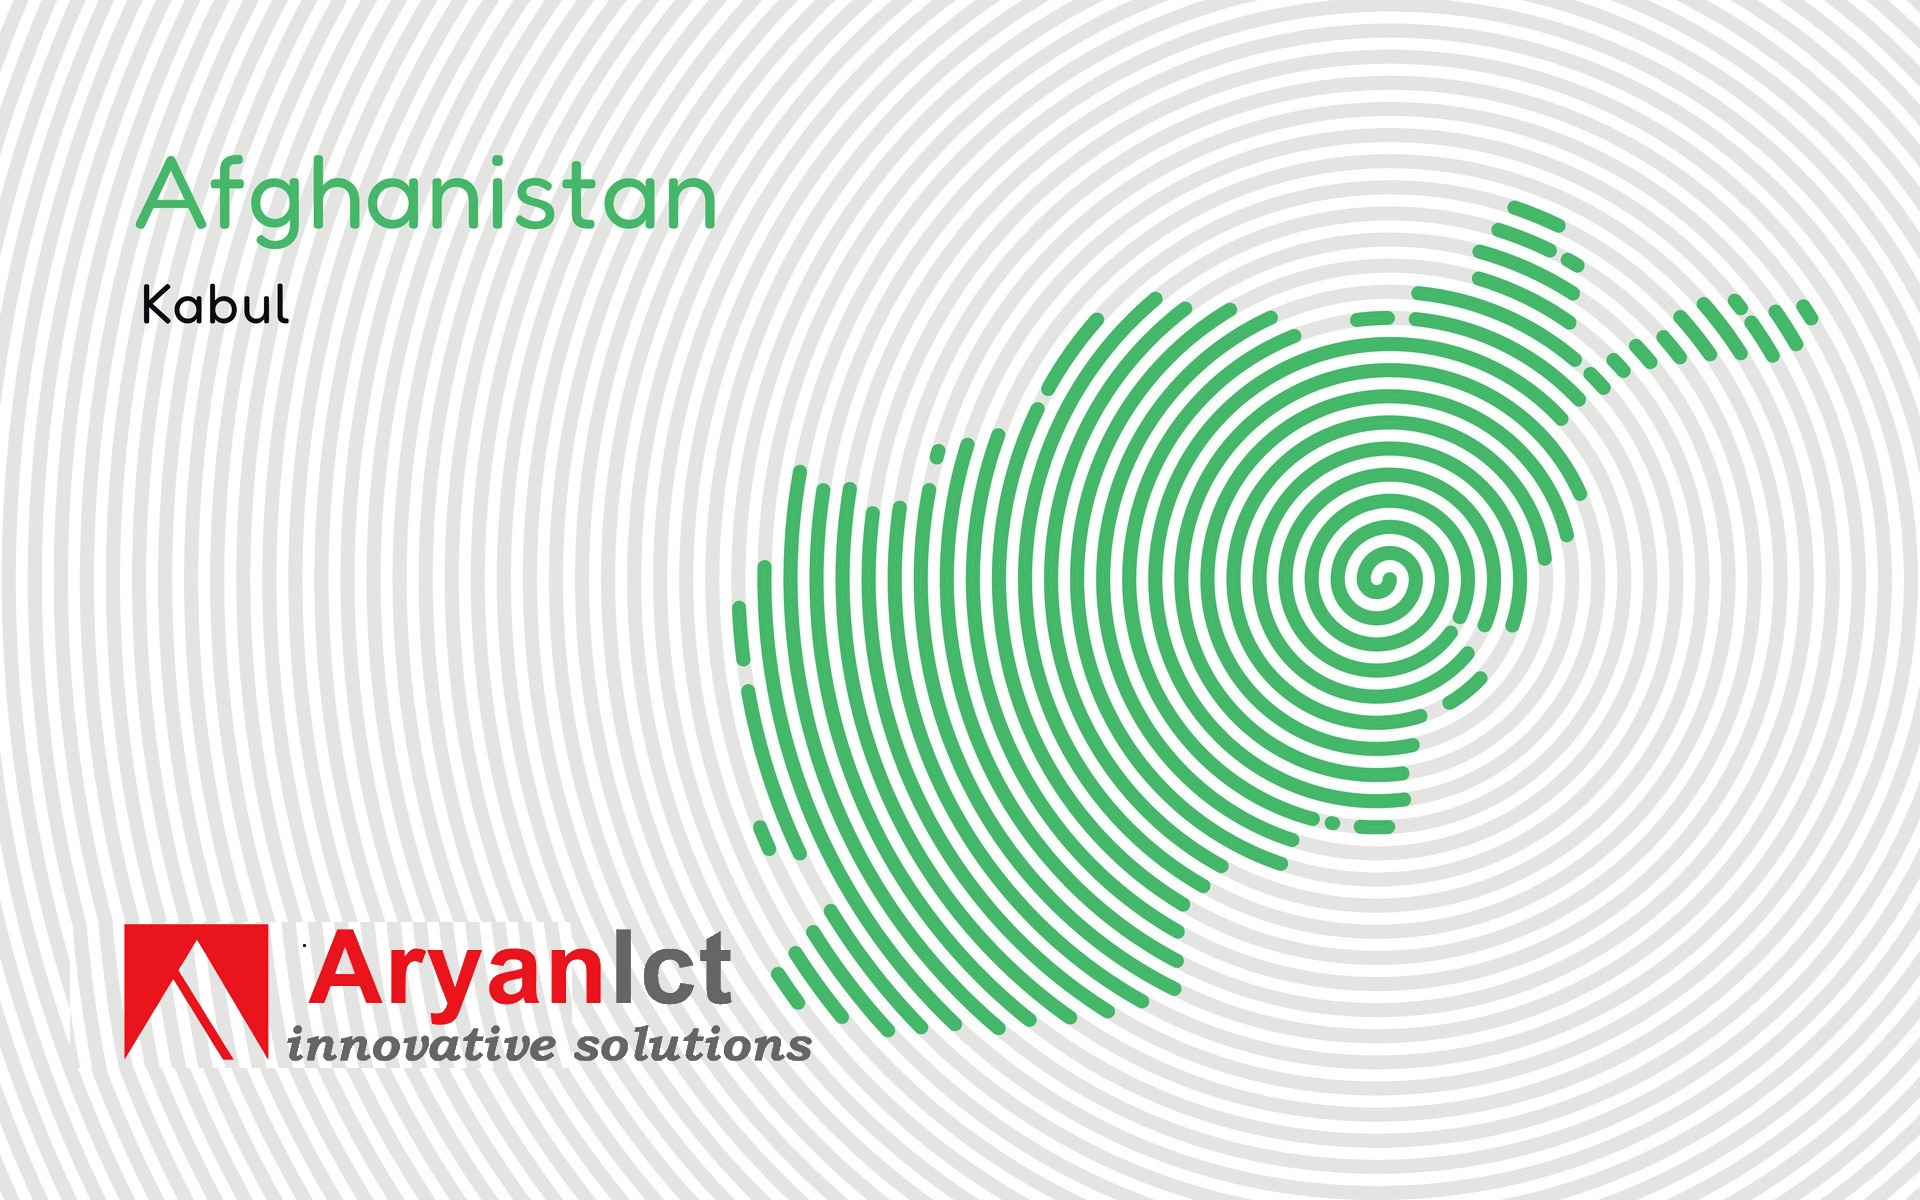  AryanIct.com has recently launched a new data cent...